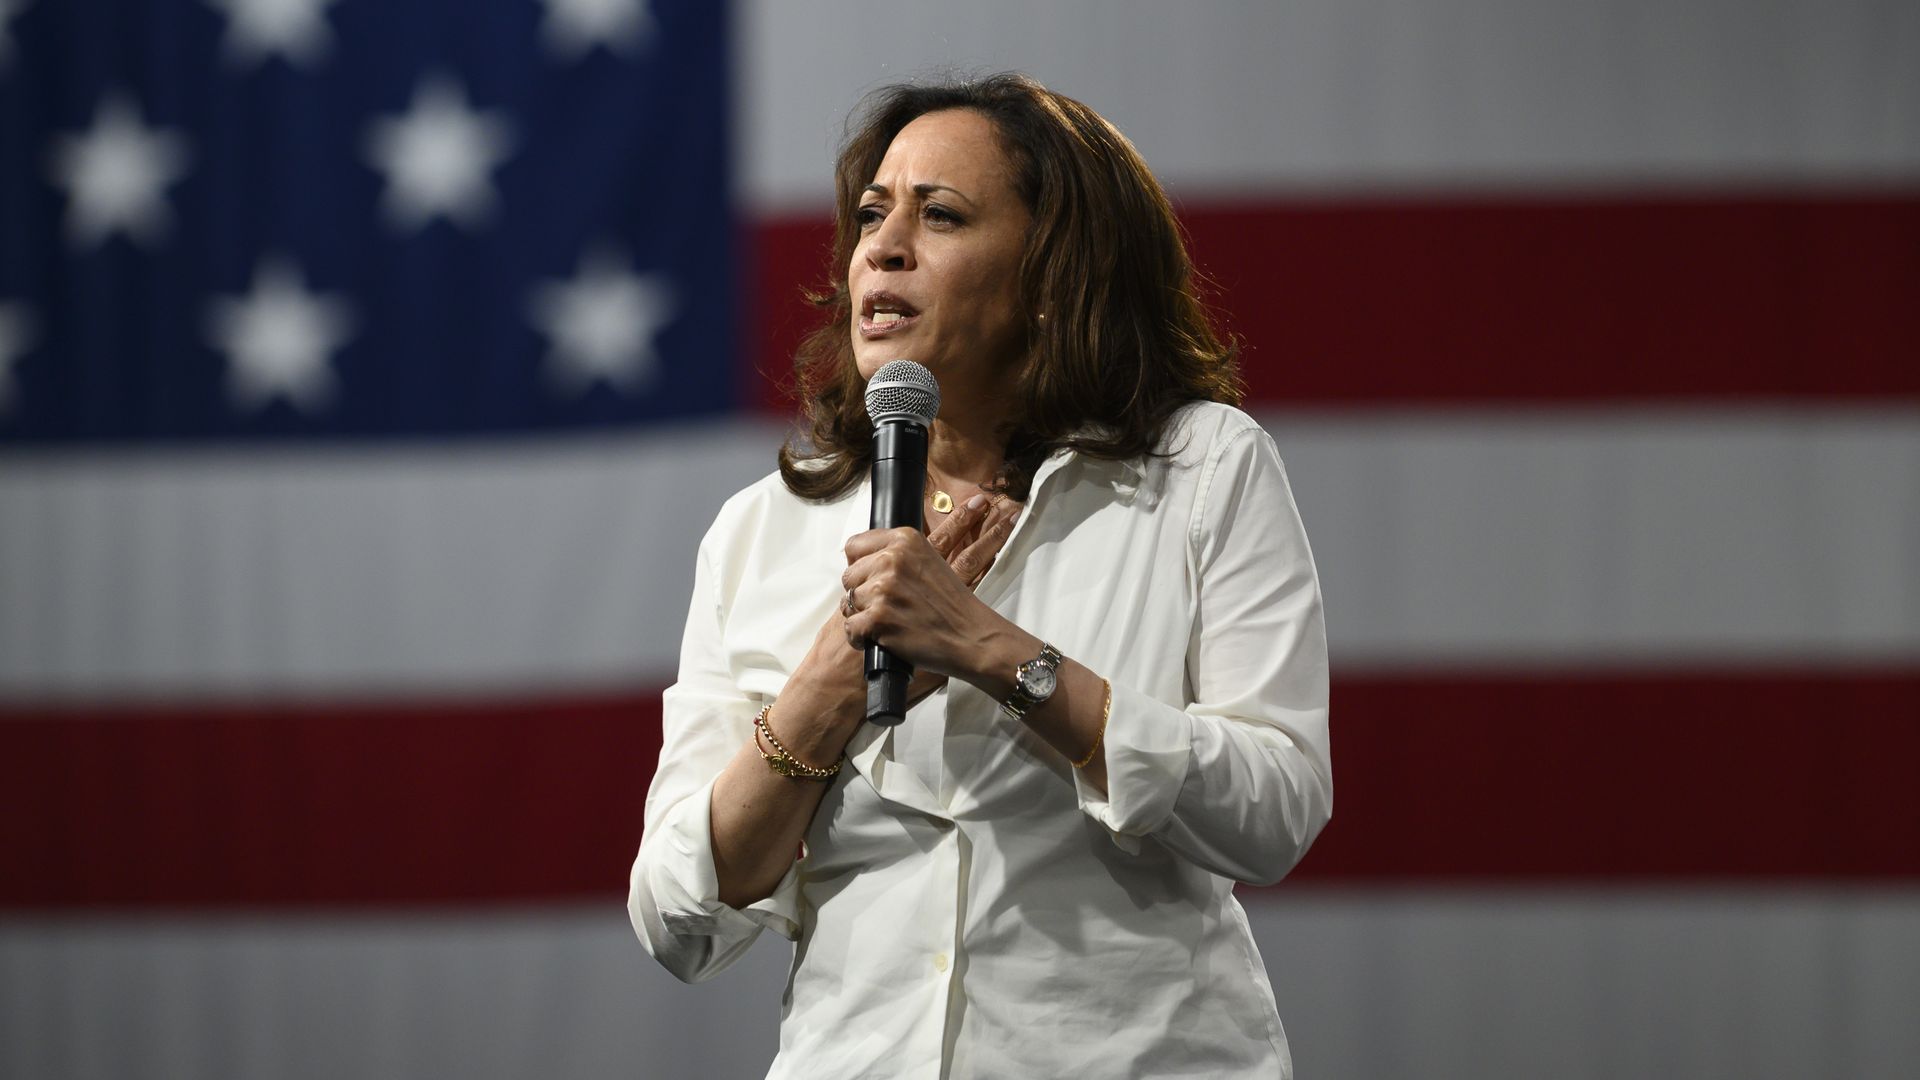 Democratic presidential candidate Sen. Kamala Harris (D-CA) speaks on stage during a forum on gun safety at the Iowa Events Center on August 10, 2019 in Des Moines, Iowa. 